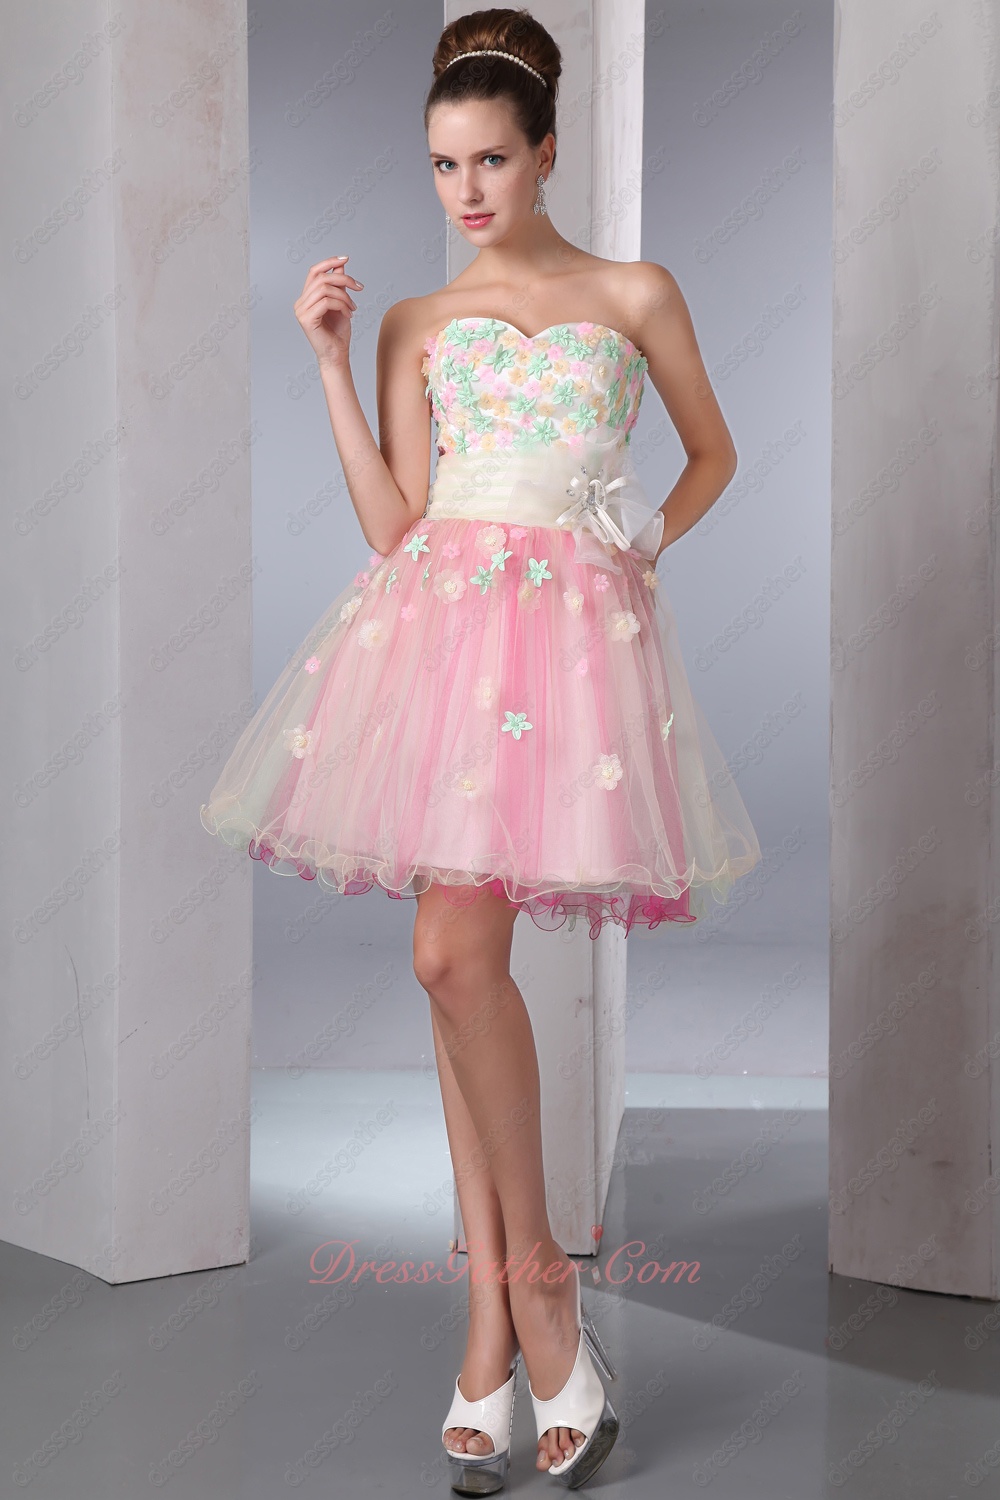 Favorable Colorful Tutu Short Homecoming Prom Gowns Colorized Flowers Intersperse - Click Image to Close